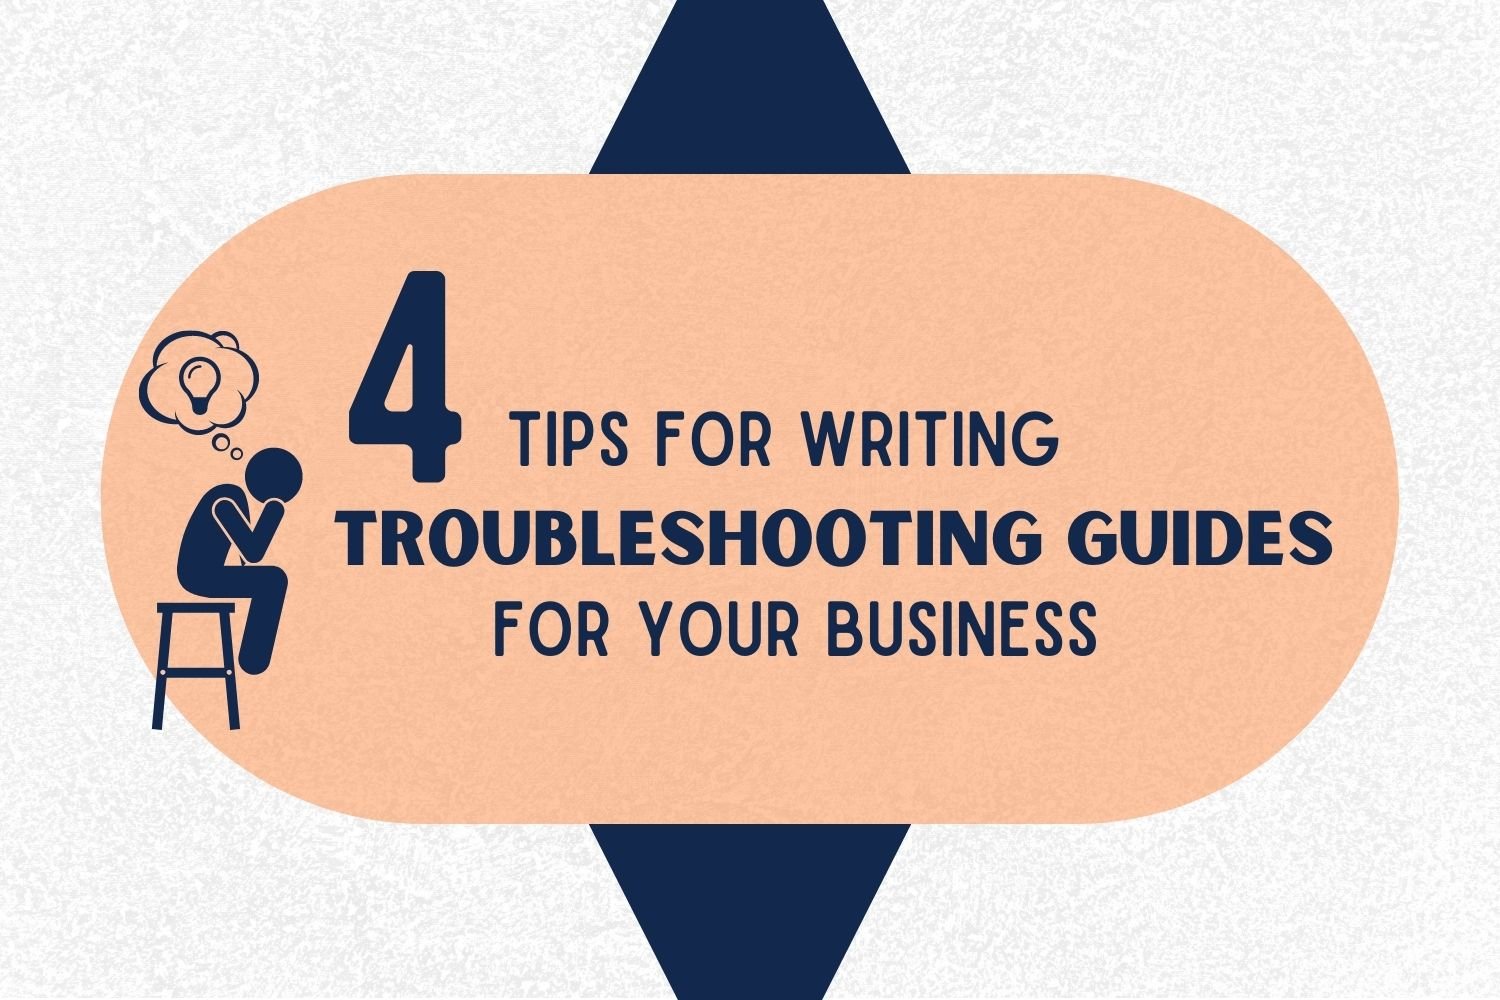 4 Tips for Writing Troubleshooting Guides For Your Business